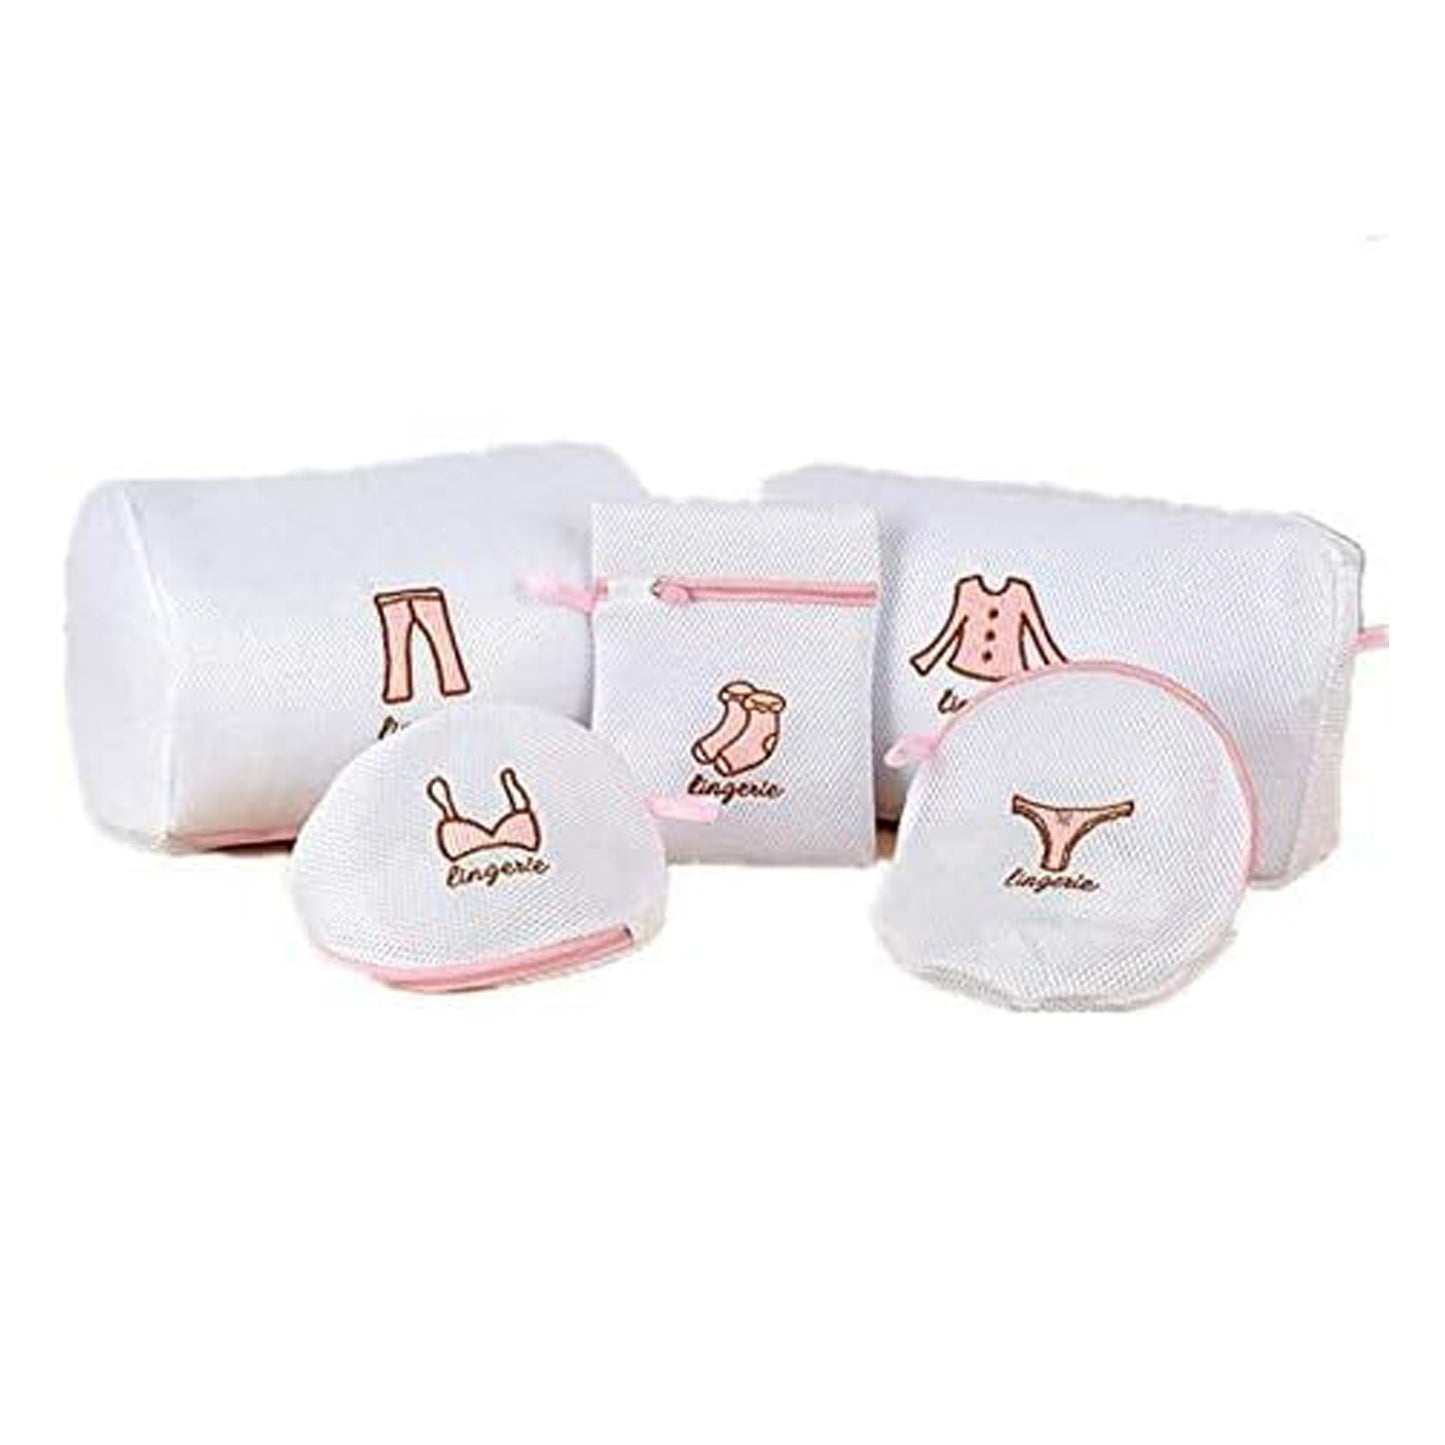 Set of 5 Wash Bag for Laundry,Blouse, Hosiery, Stocking, Underwear, Bra and Lingerie